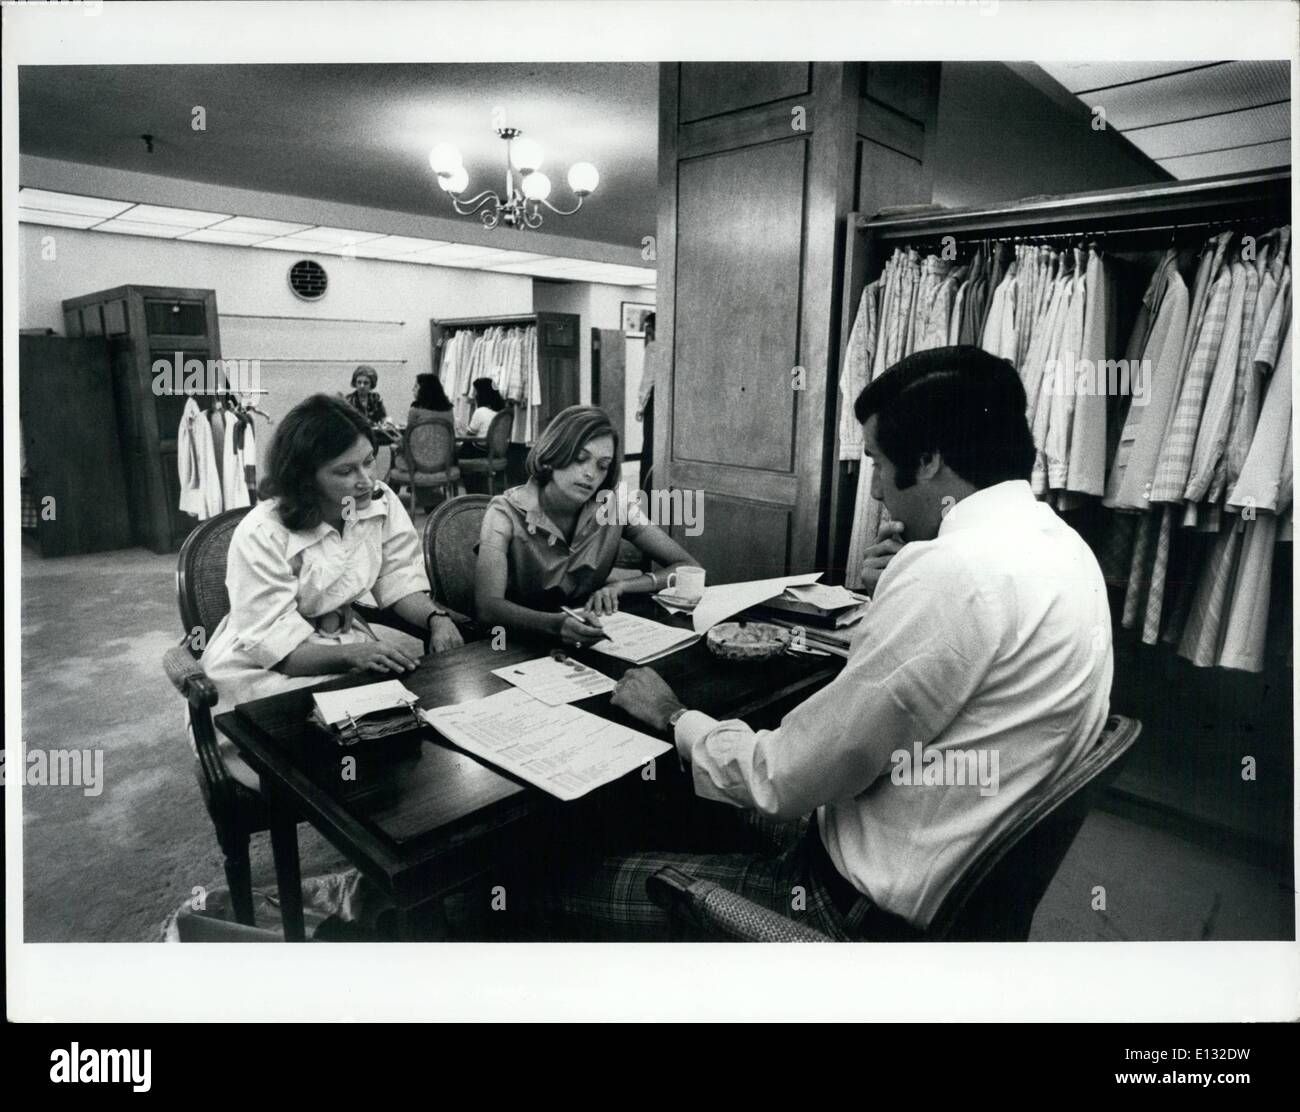 Feb. 26, 2012 - July, 1975 A merchandise buyer (center) and her assistant (left), from a major New York department store, orders garments from Evan-Picone, a division of Deva International on Seventh Avenue in New York City. Stock Photo